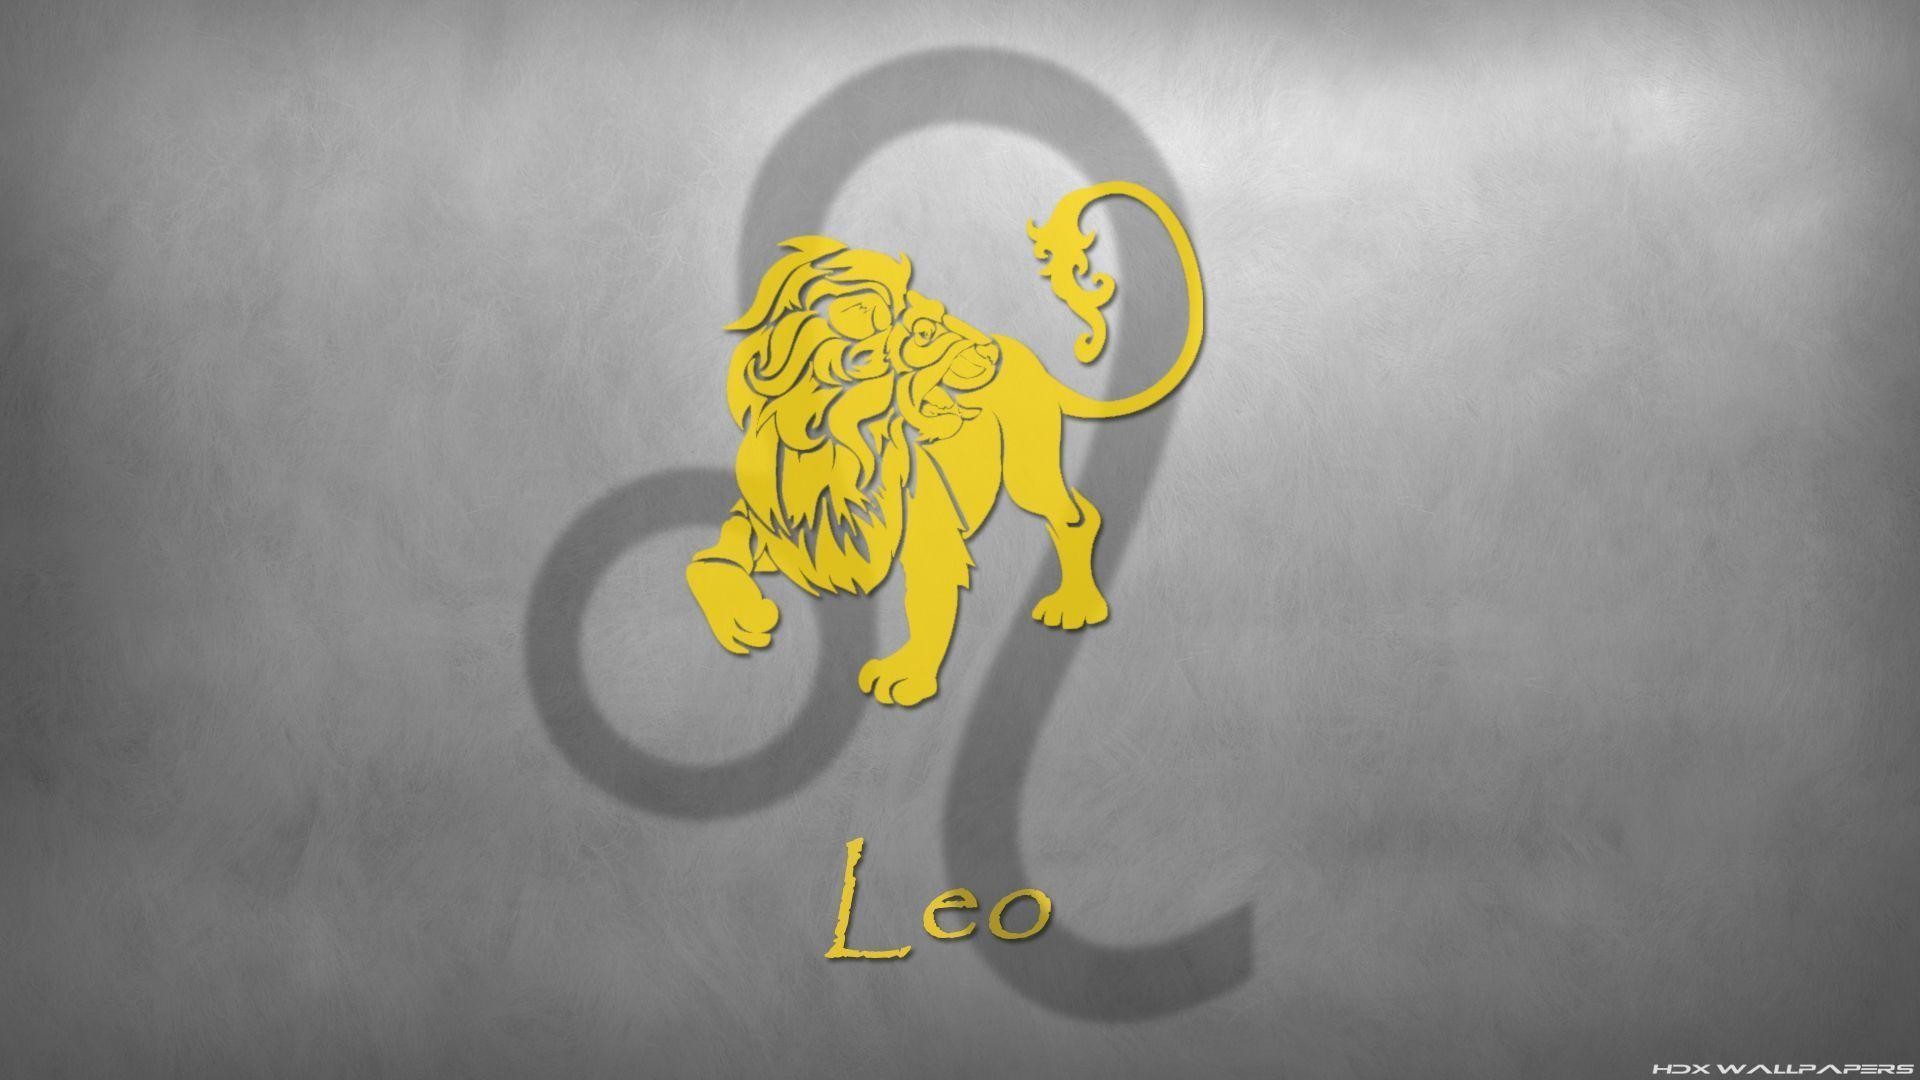 1920x1080 Zodiac sign Leo wallpapers and images - wallpapers, pictures, photos